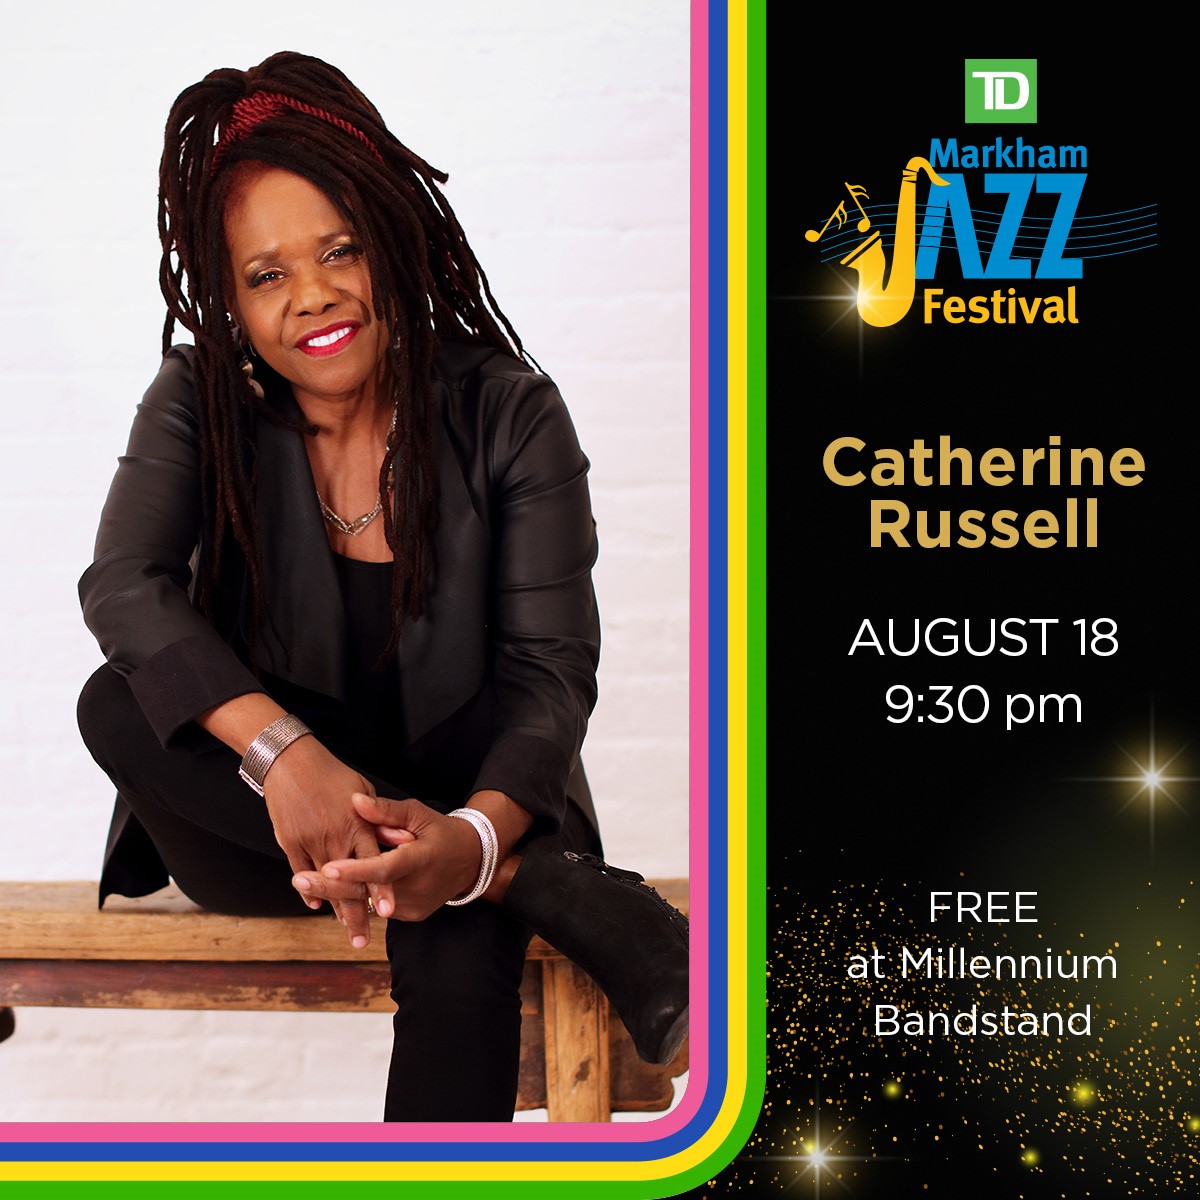 Thrilled to announce Grammy Award-winning vocal sensation Catherine Russell will headline Friday night of the 2023 TD Markham Jazz Festival! 🎉 The concert happens on the Millennium Bandstand Stage, August 18, at *9:30 pm. See you there! markhamjazzfestival.com